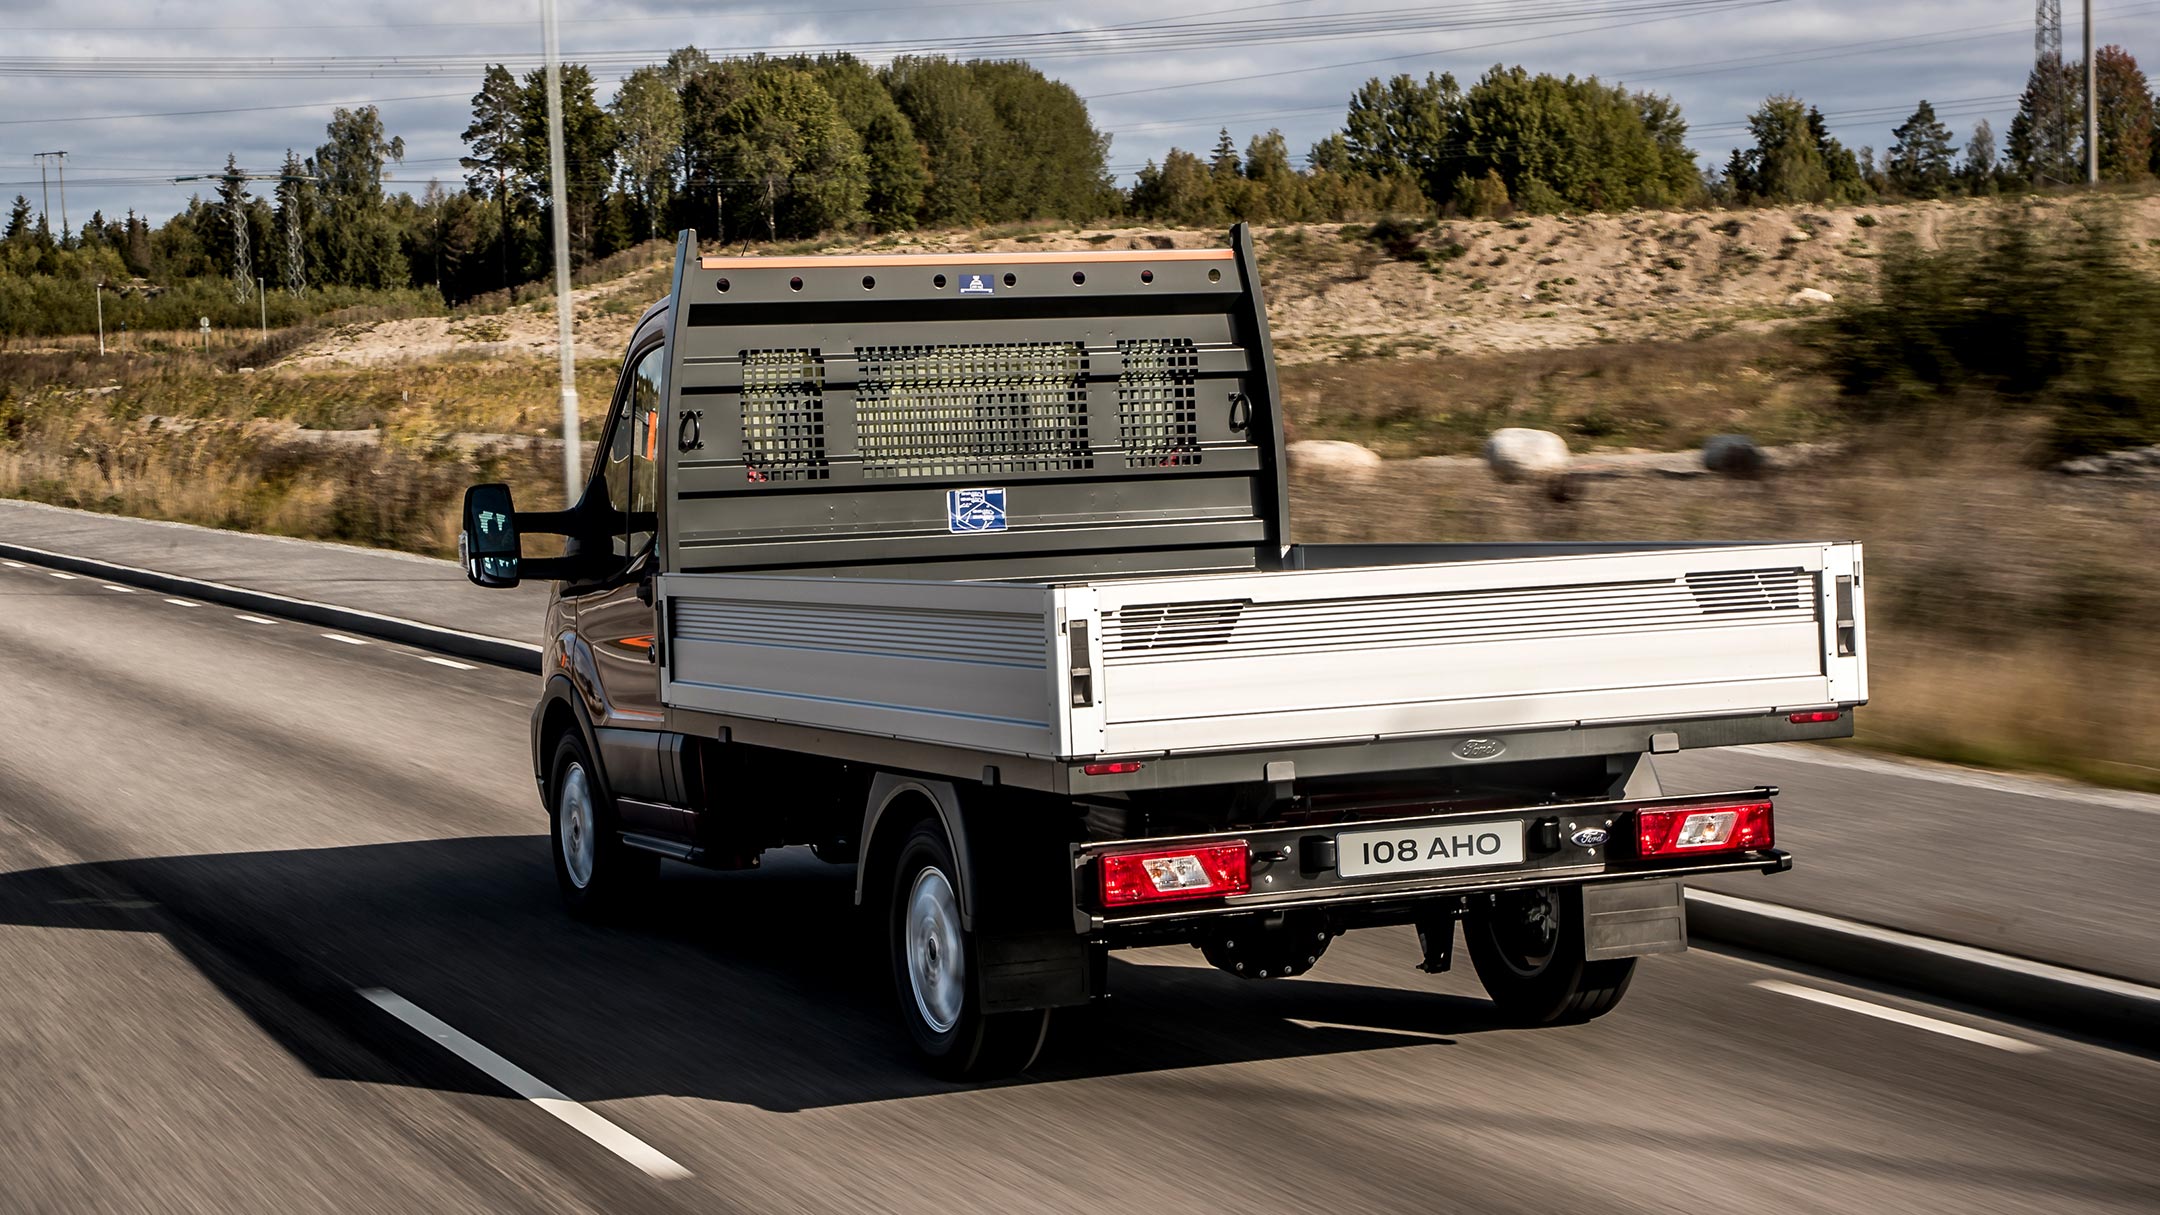 Transit Chassis Cab on highway in motion view from back